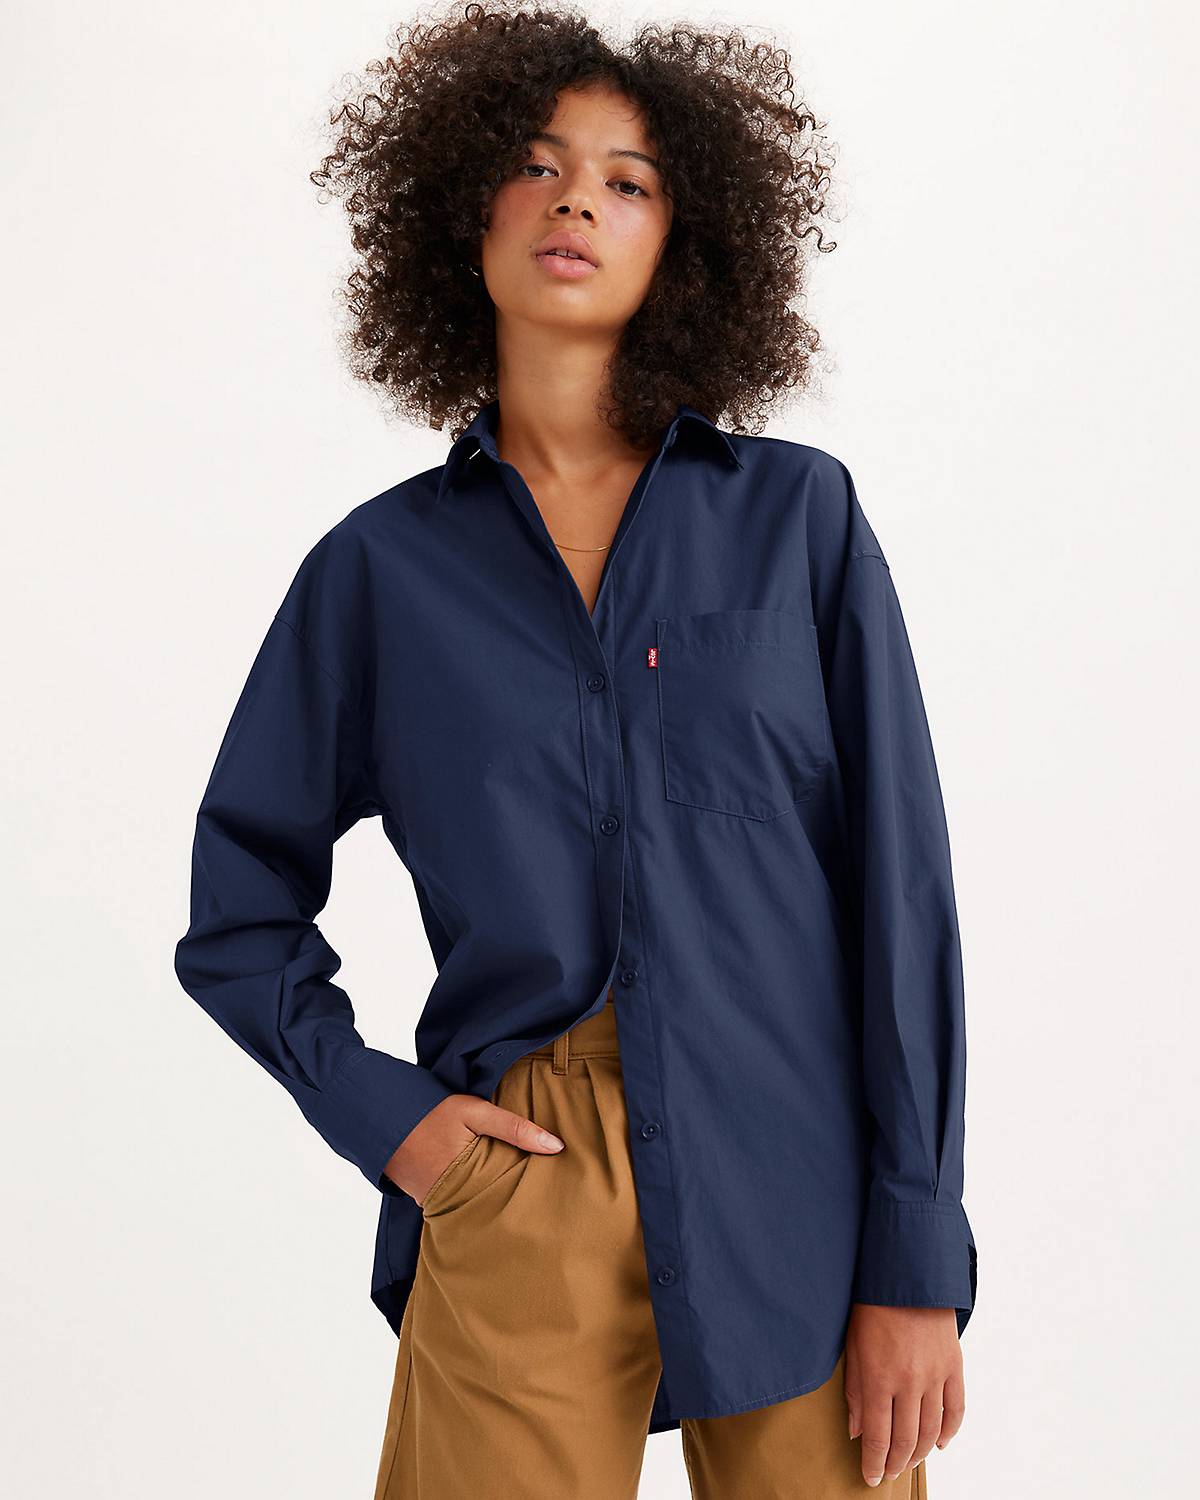 Monogram denim shirt could be your work day or chilling day outfit